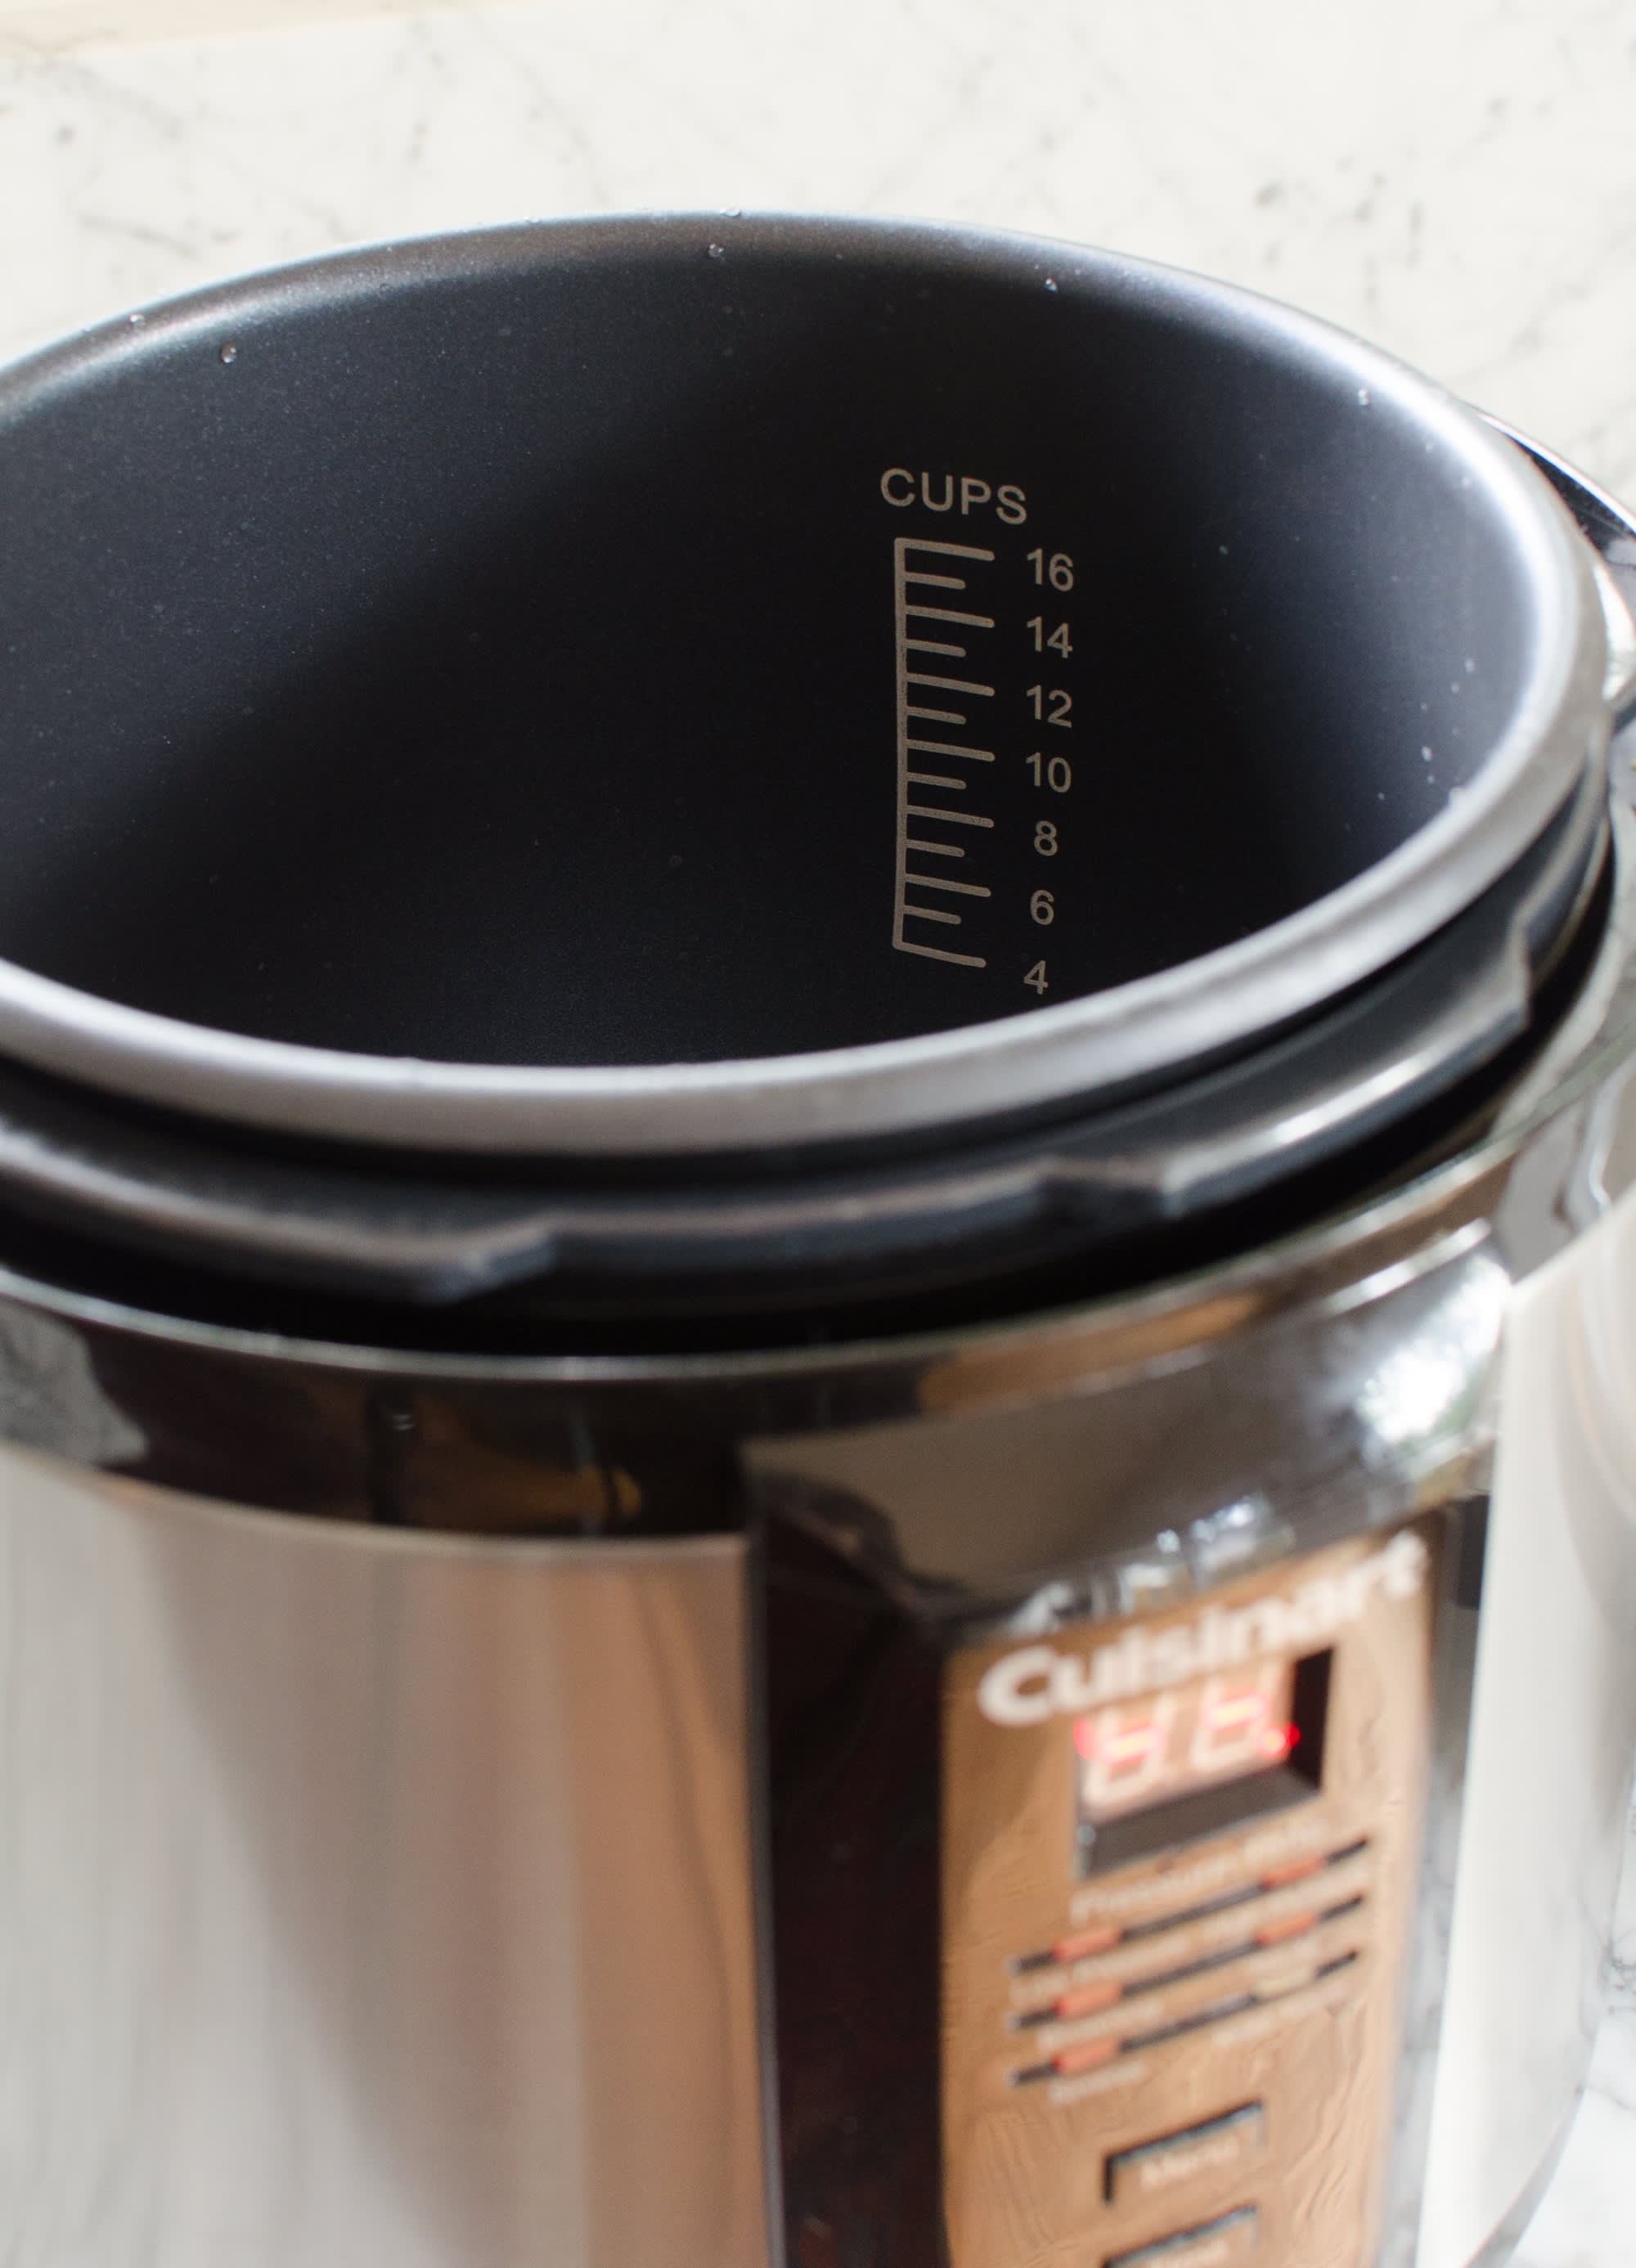 Product review: Cuisinart electric pressure cooker